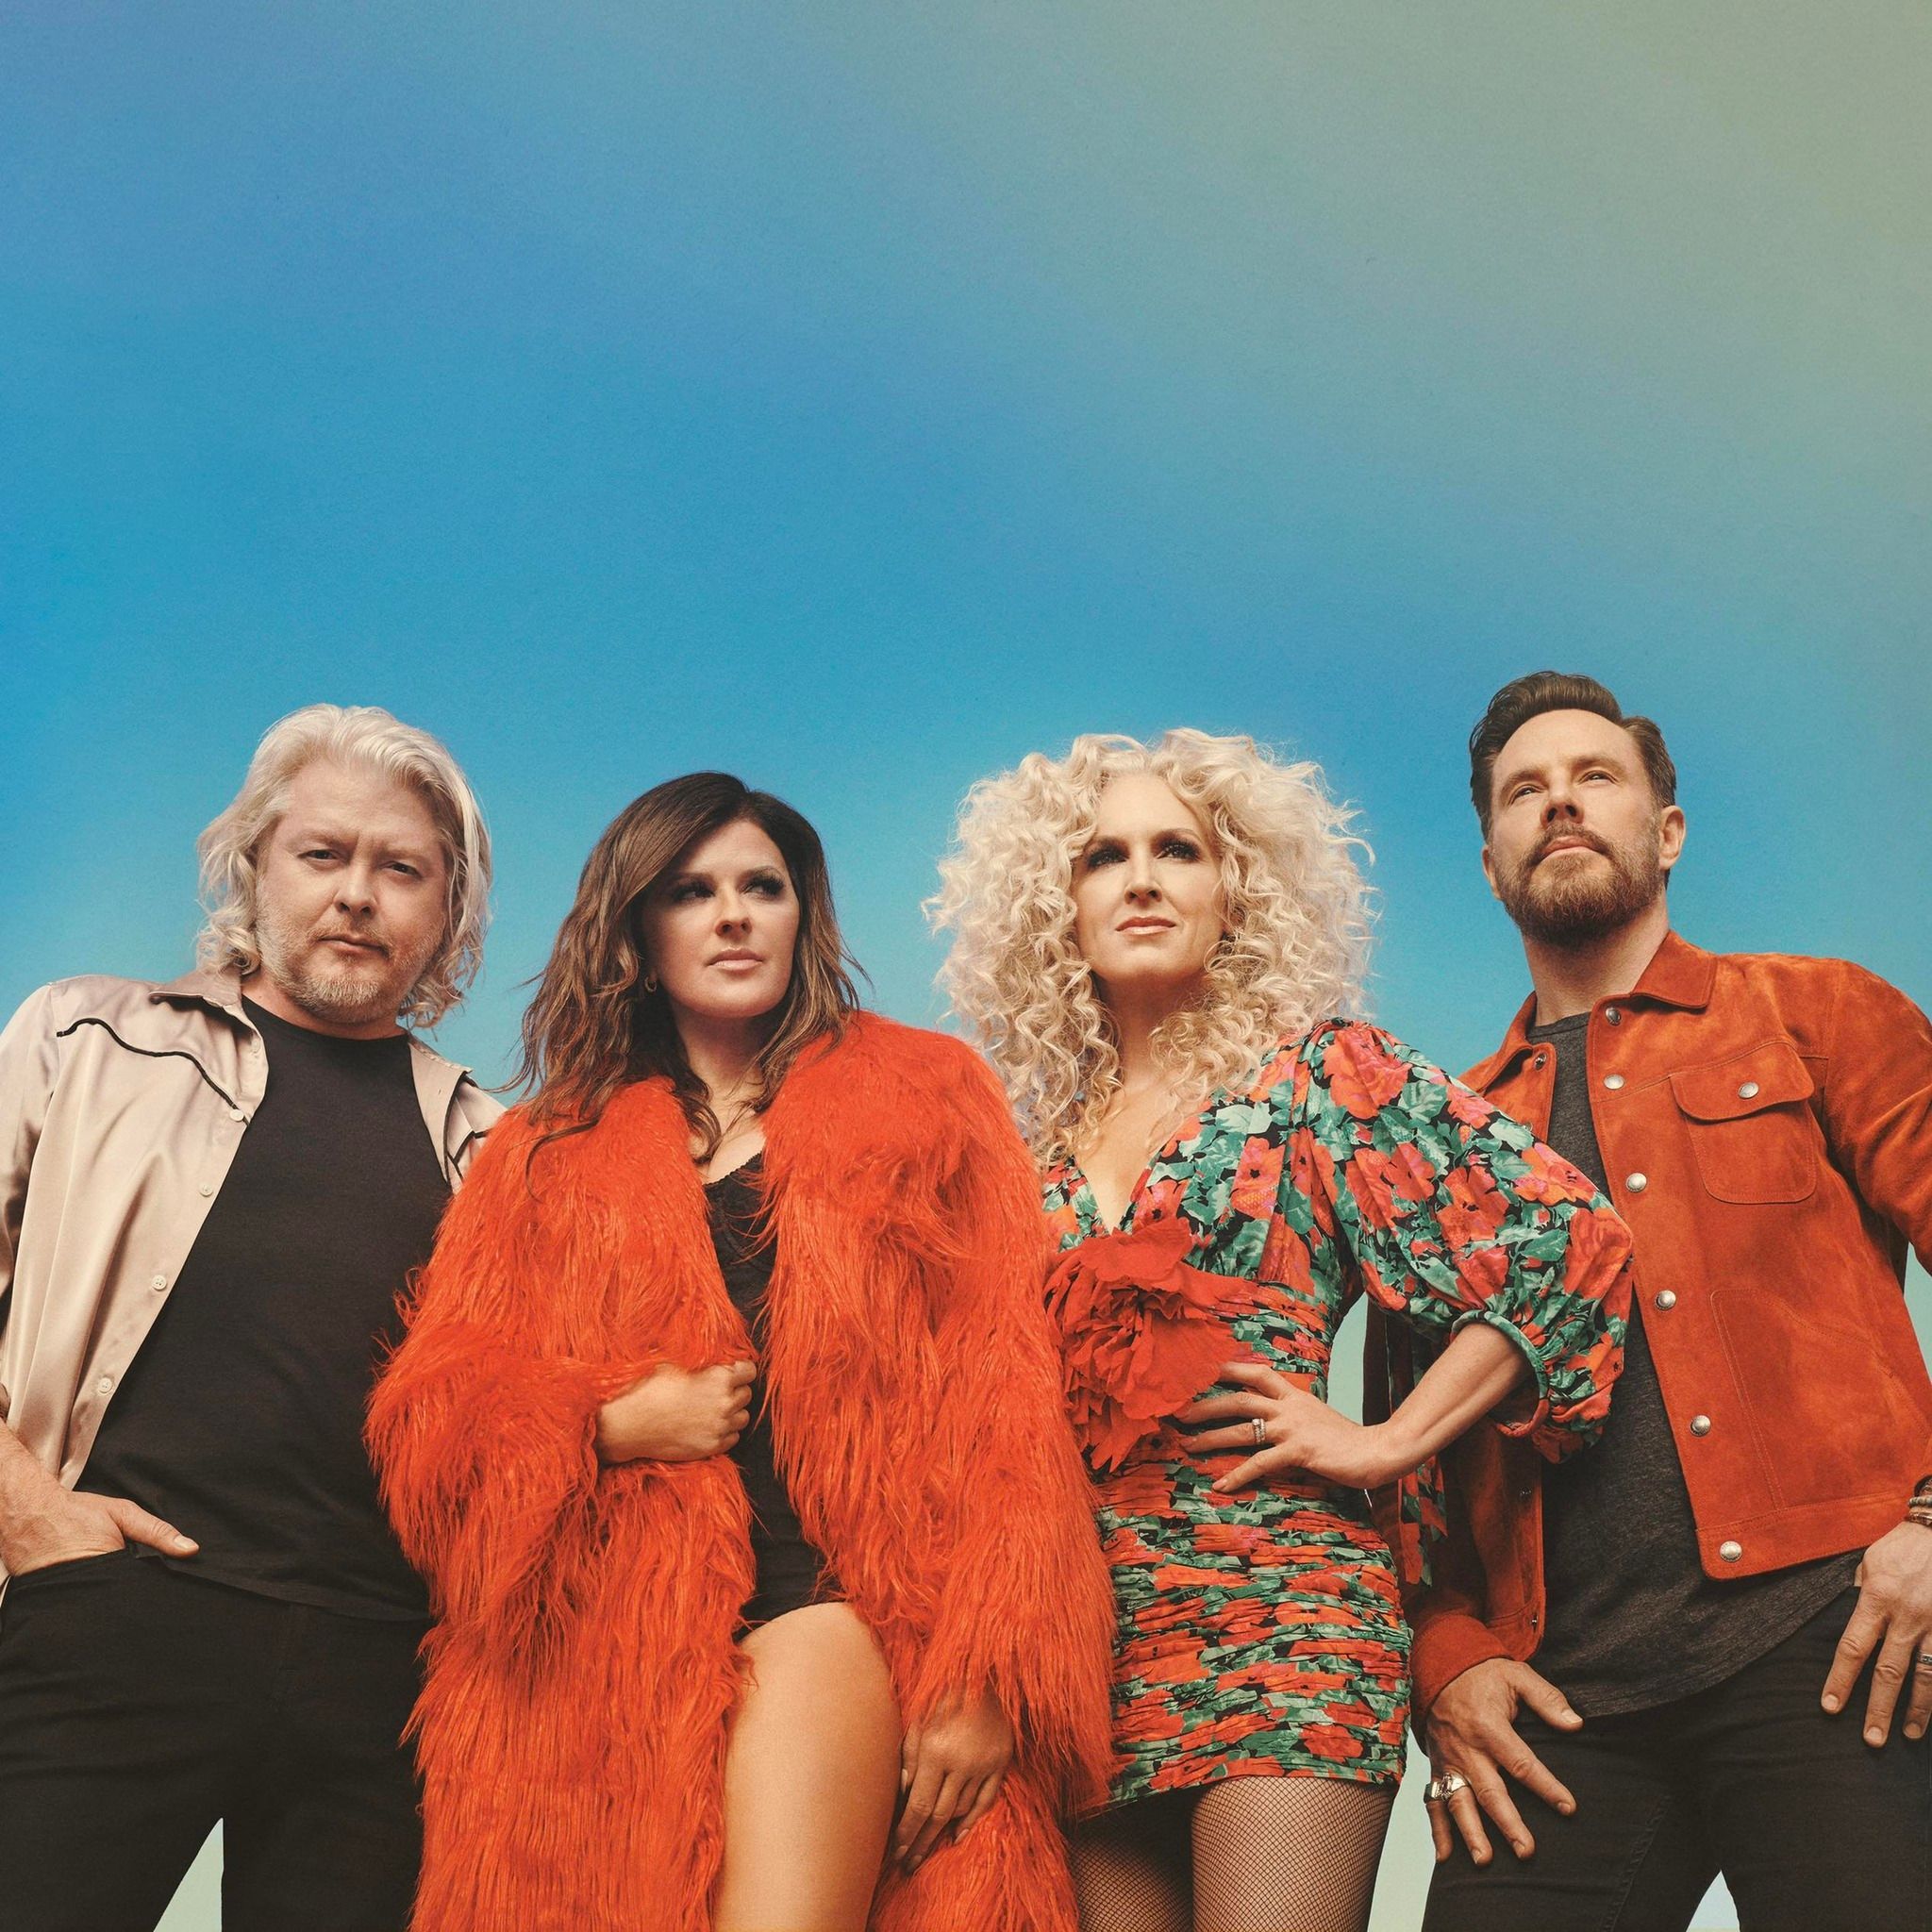 LITTLE BIG TOWN RELEASES NEW SONG “RICH MAN”  FROM UPCOMING ALBUM MR. SUN